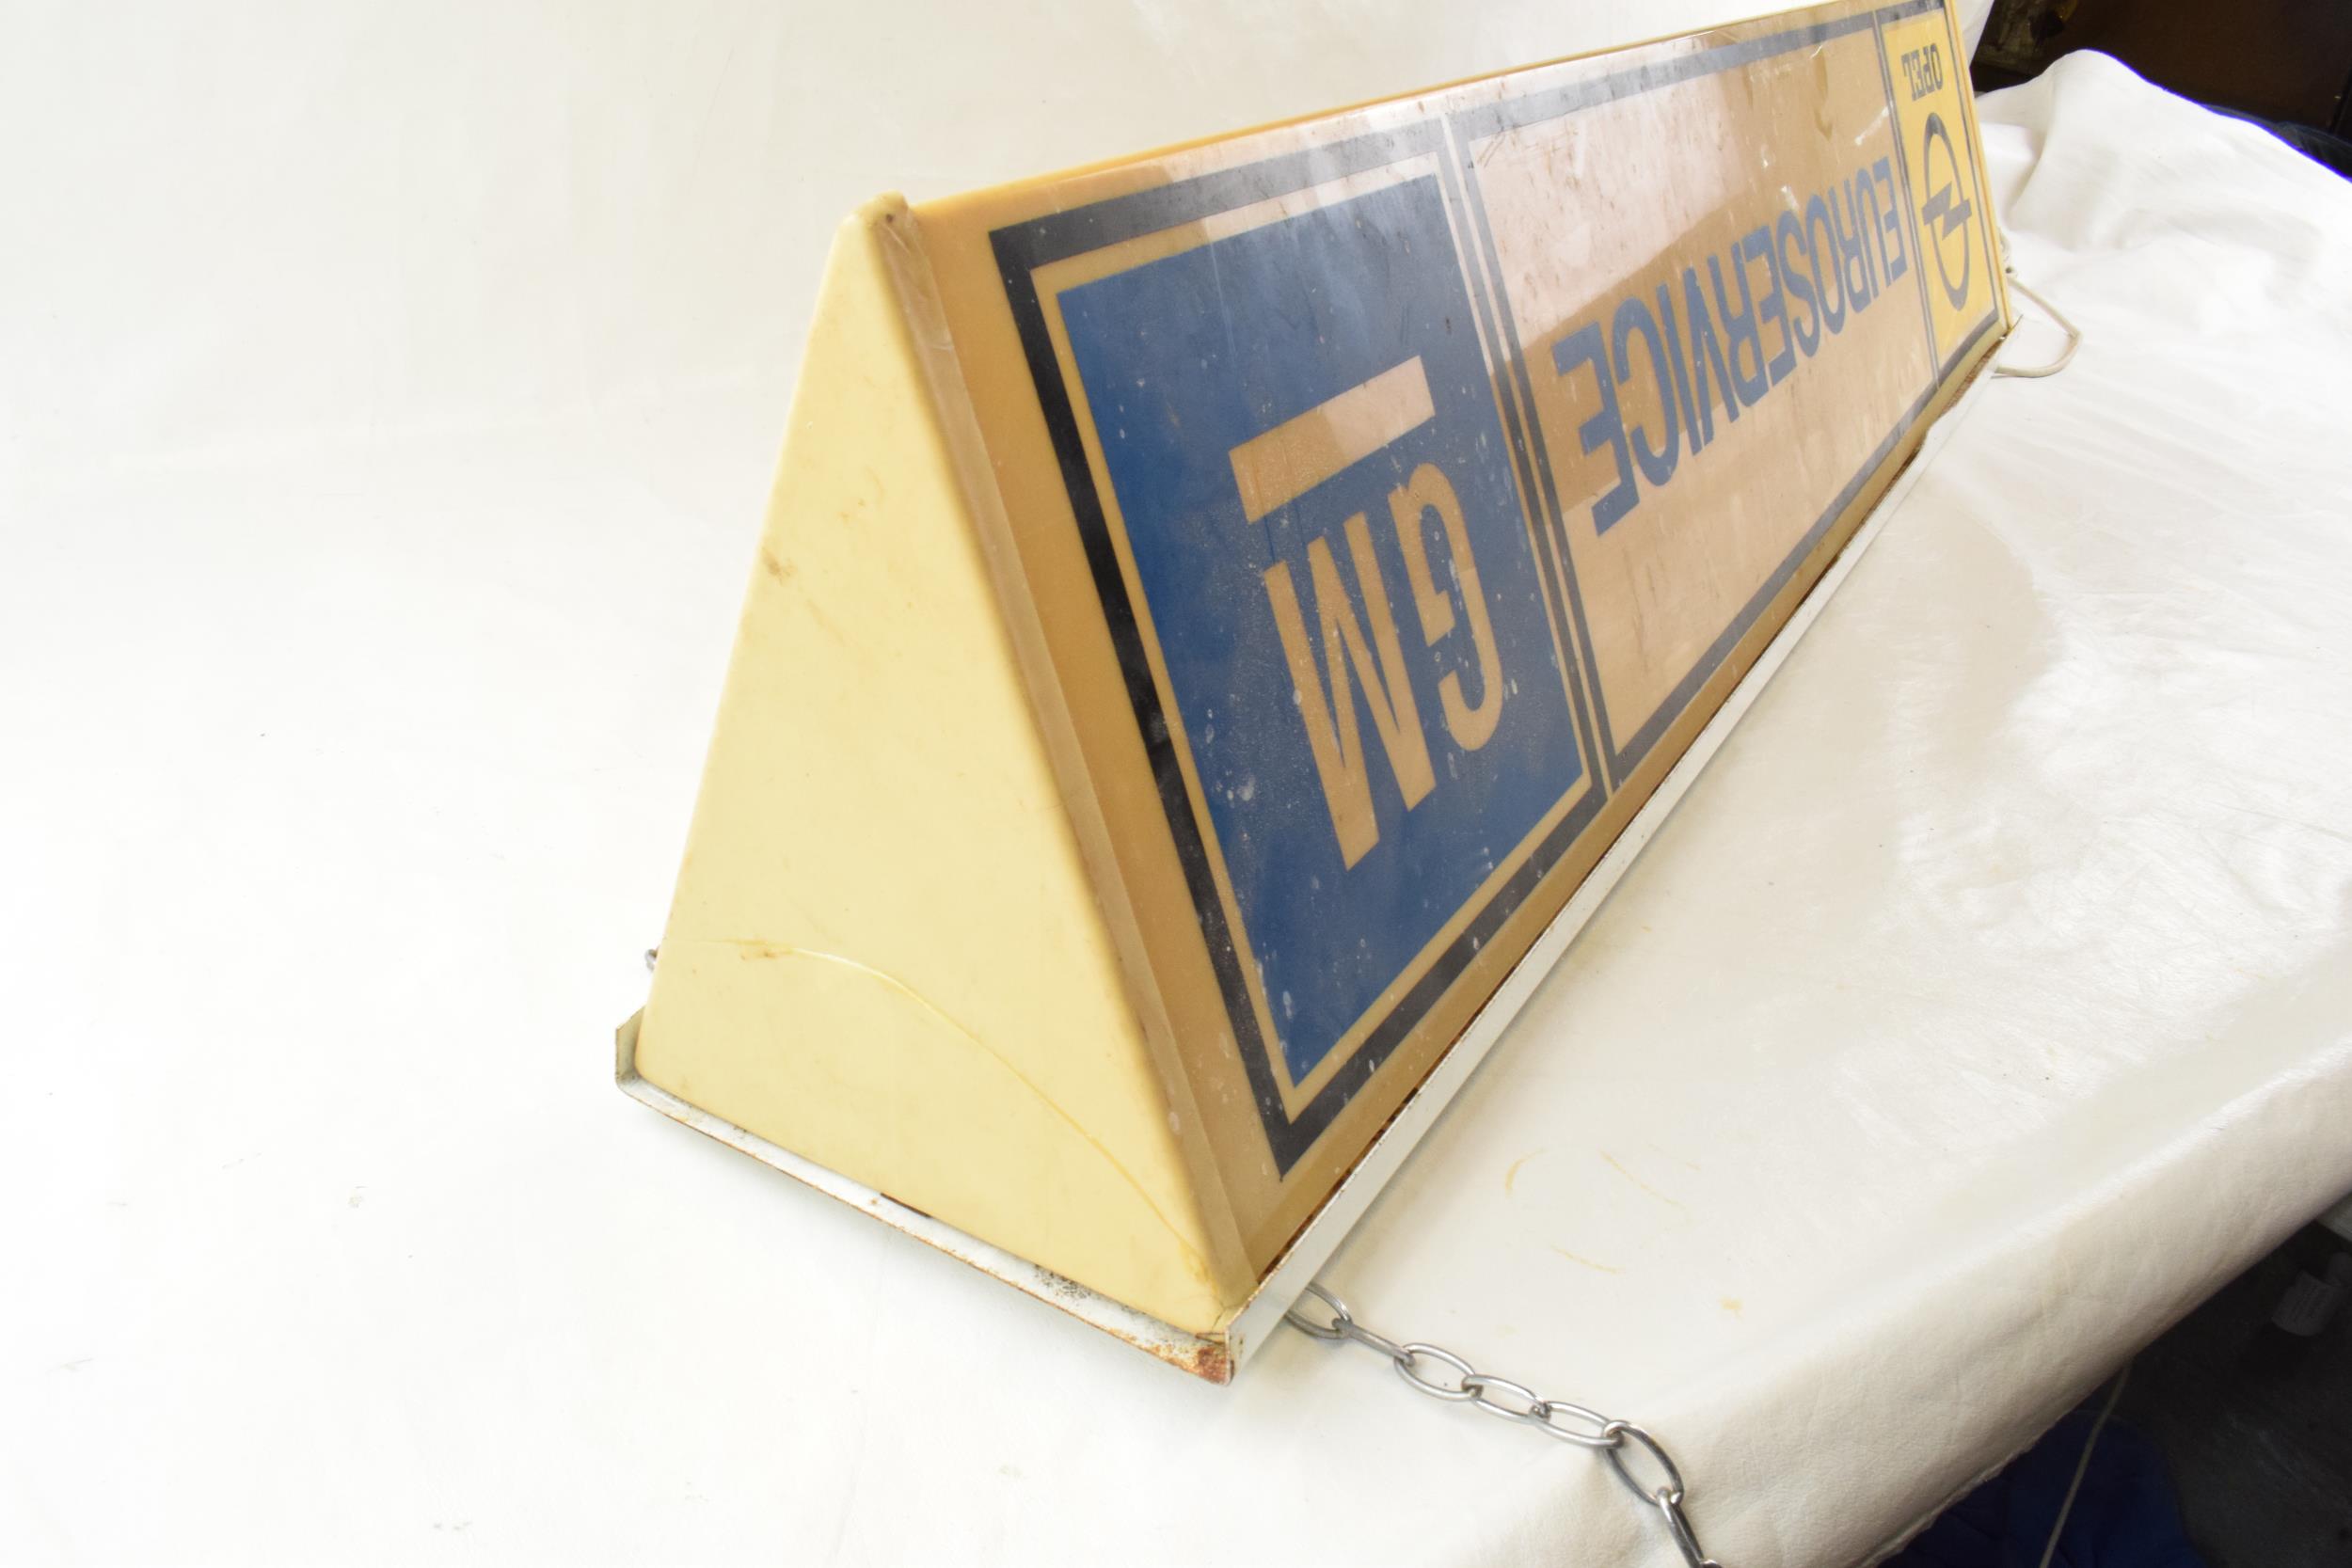 An original vintage double-sided Opel EUROSERVICE GM General Motors Lightbox salvaged from a car - Image 4 of 6